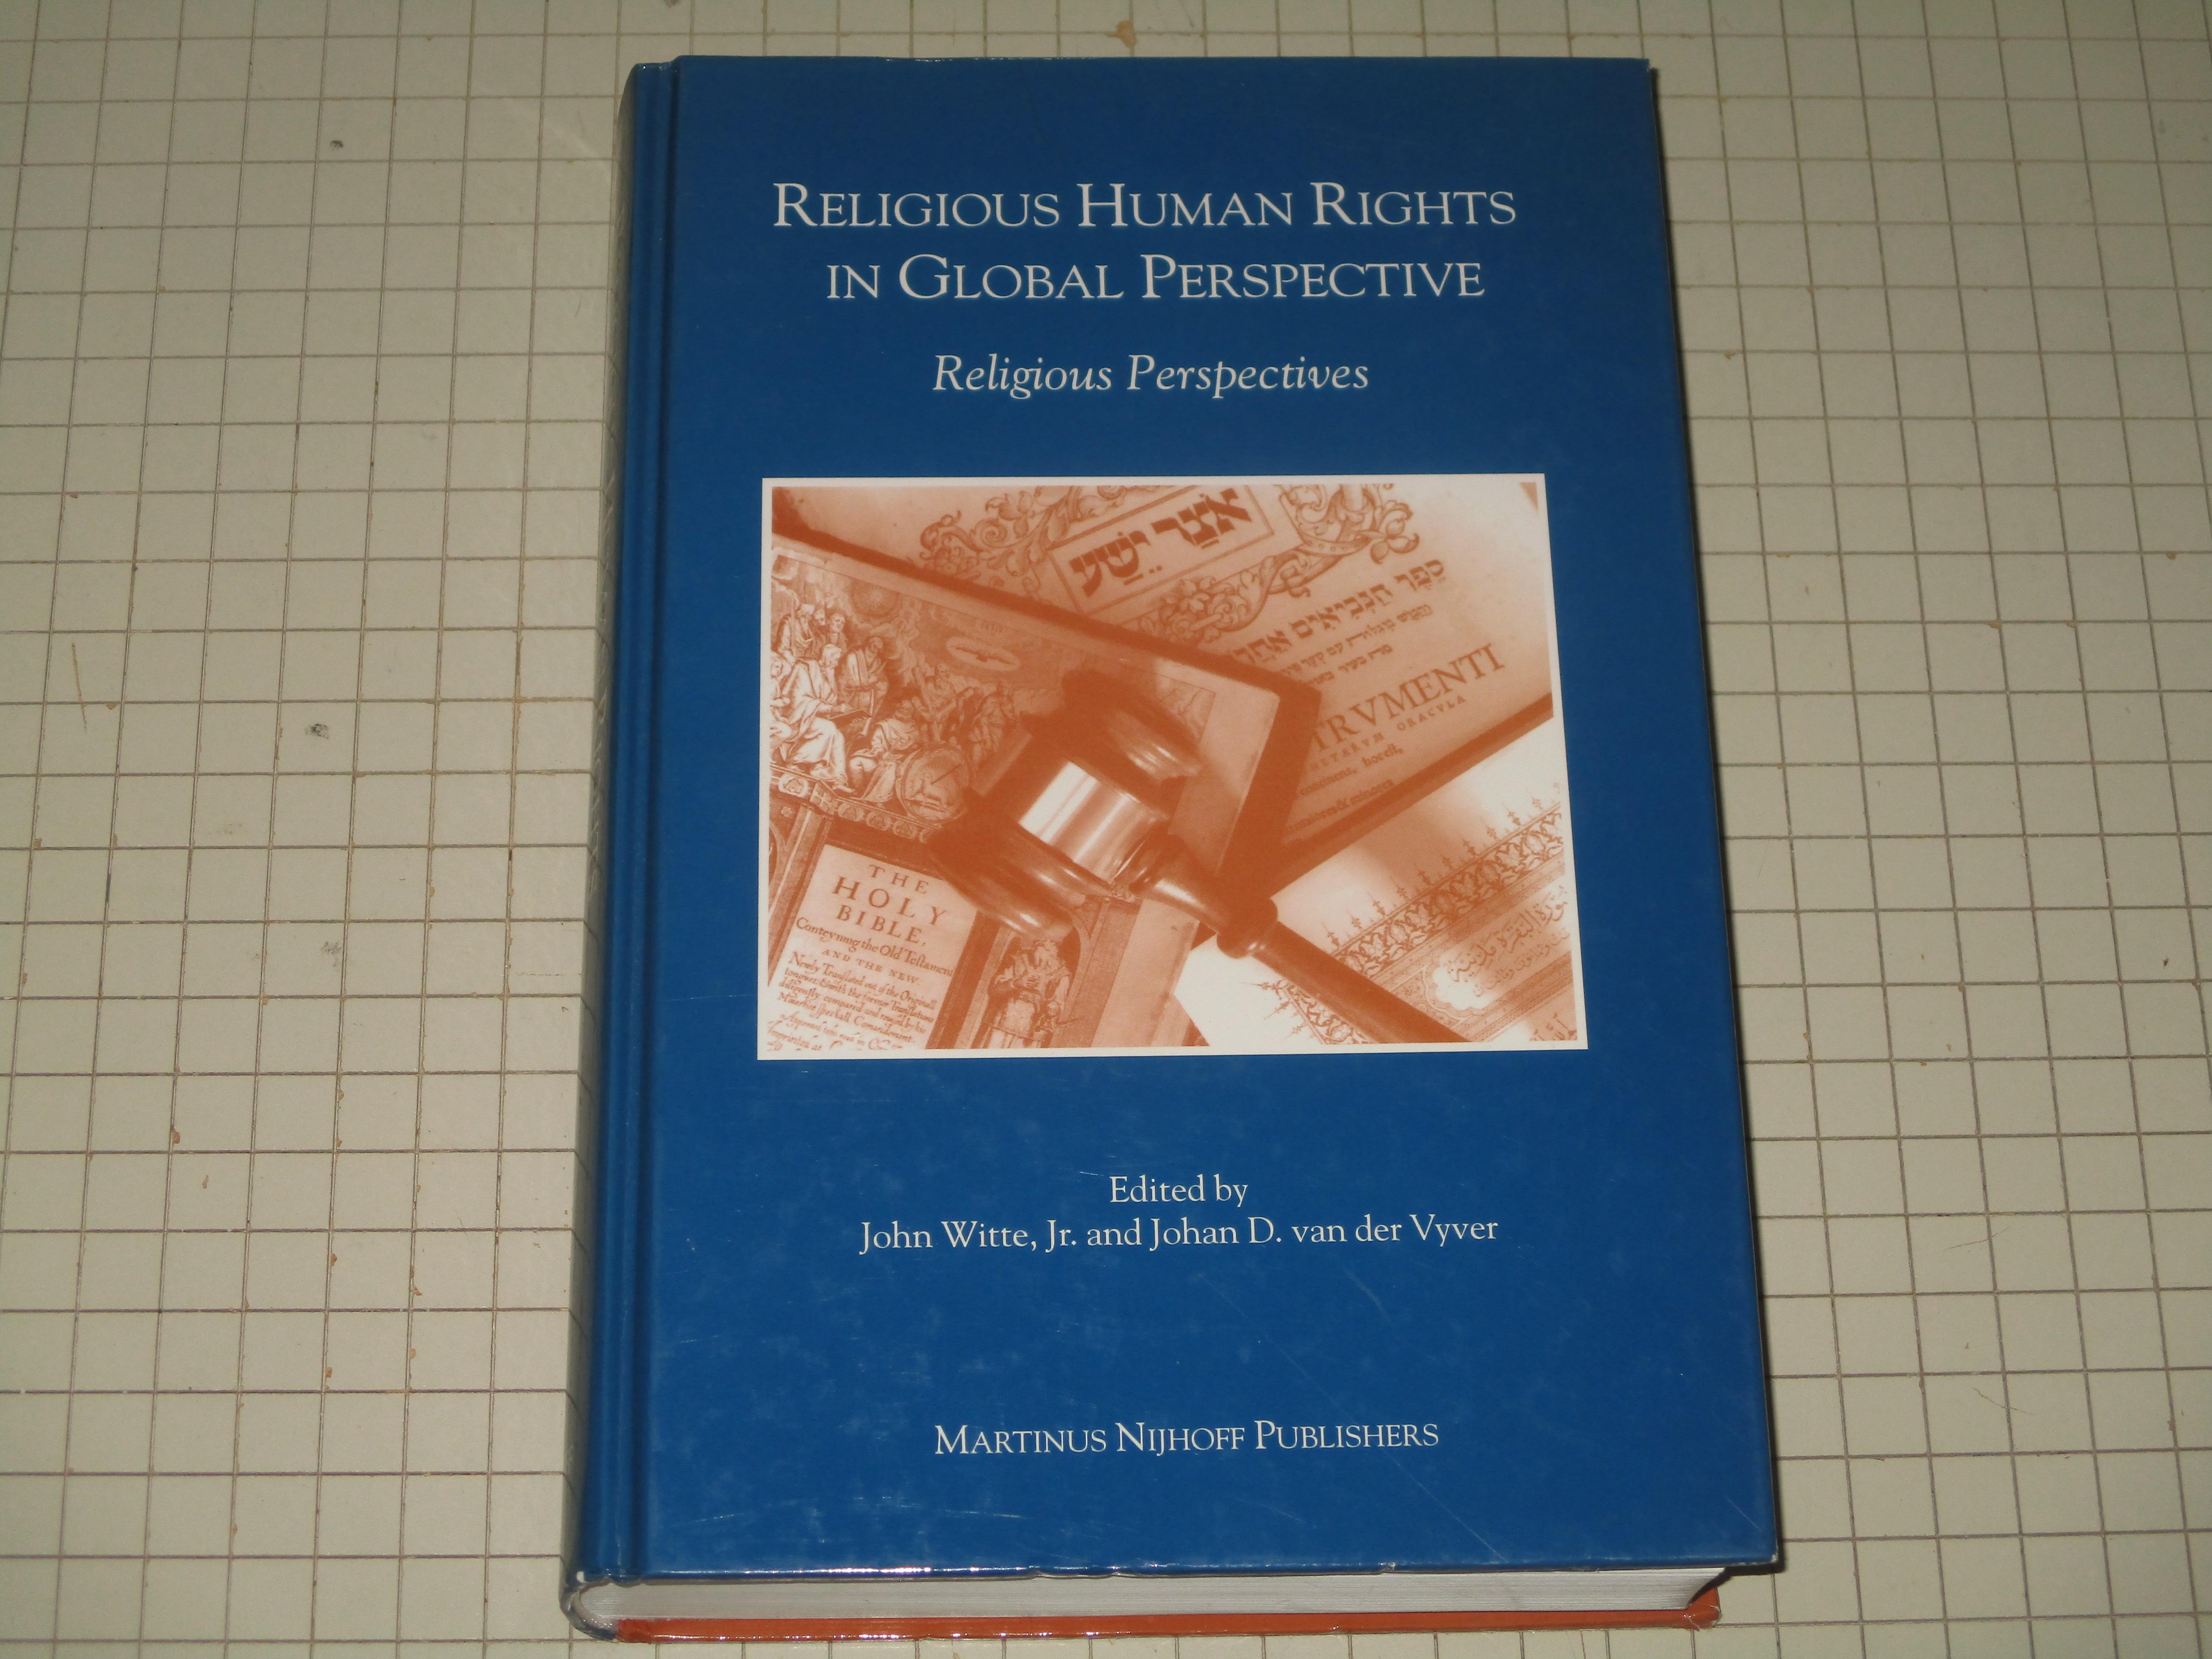 Religious Human Rights in Global Perspectives:Religious Perspectives - John Witte, Jr. and John D. van der Vyver, editors